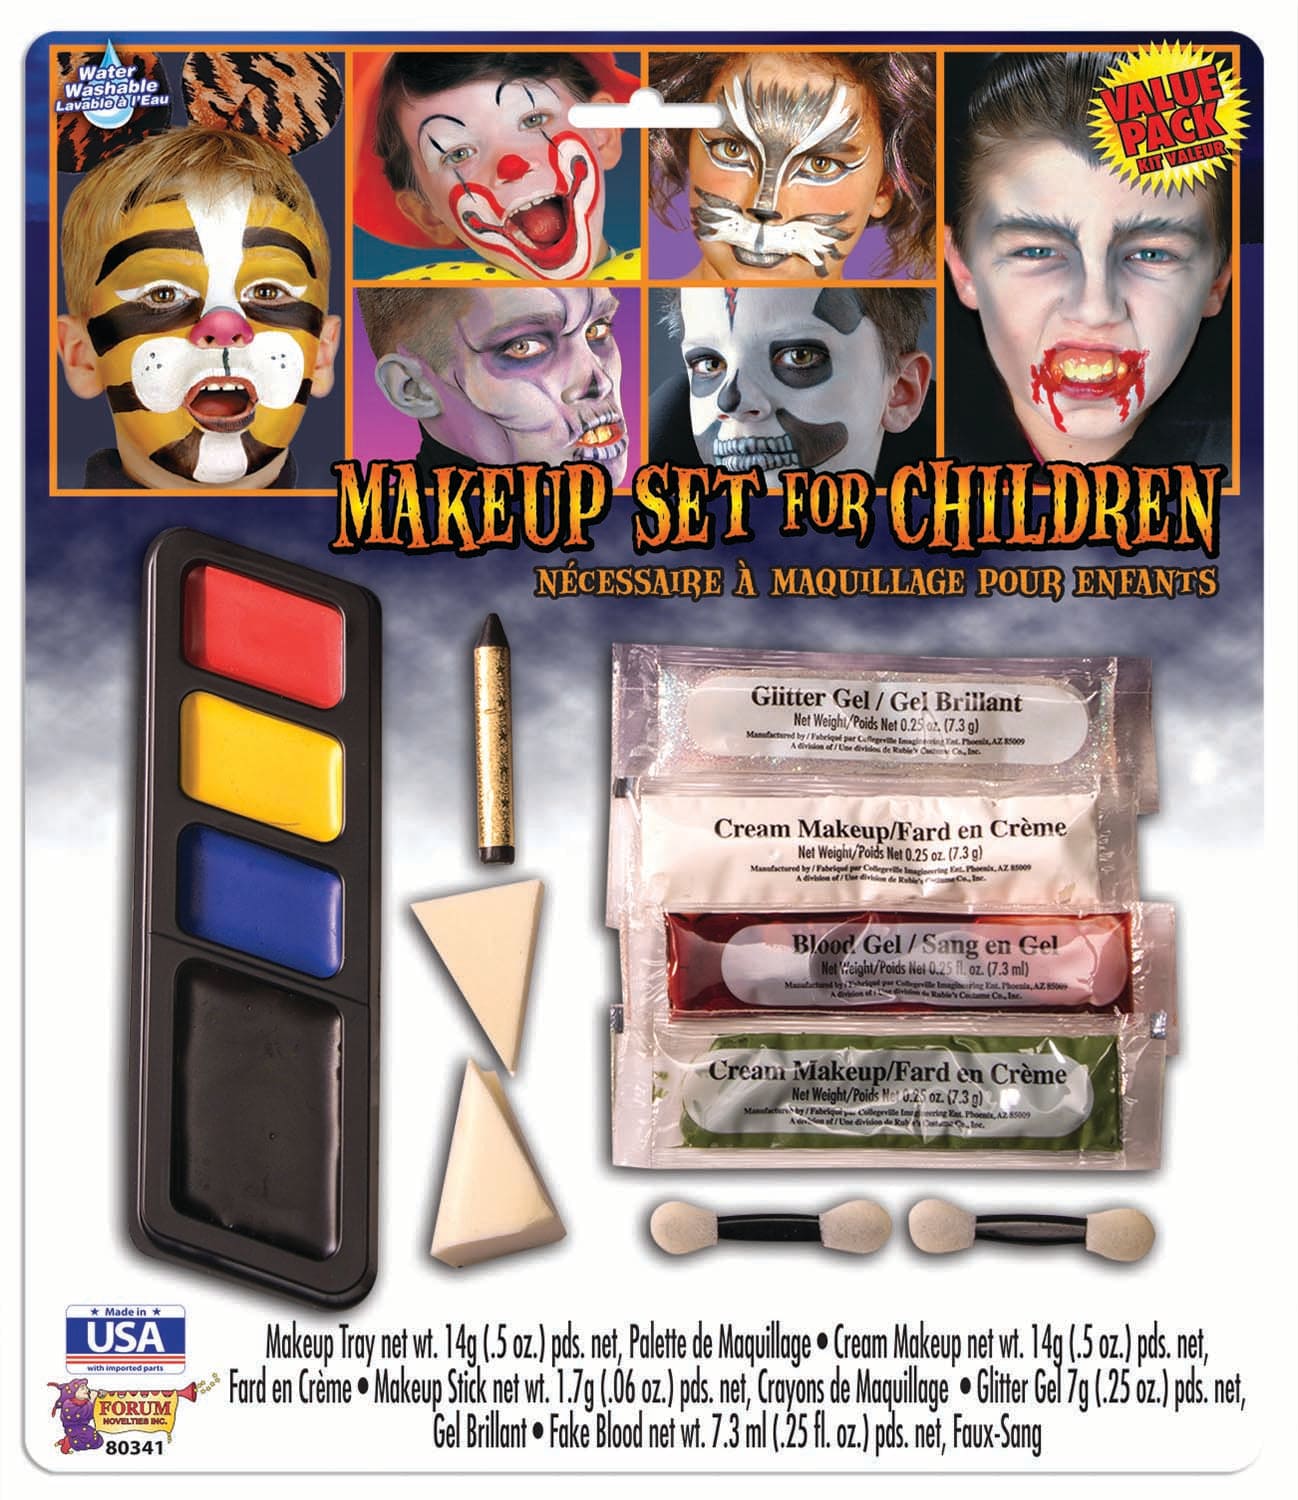 Creative Makeup Kits and Set for Children